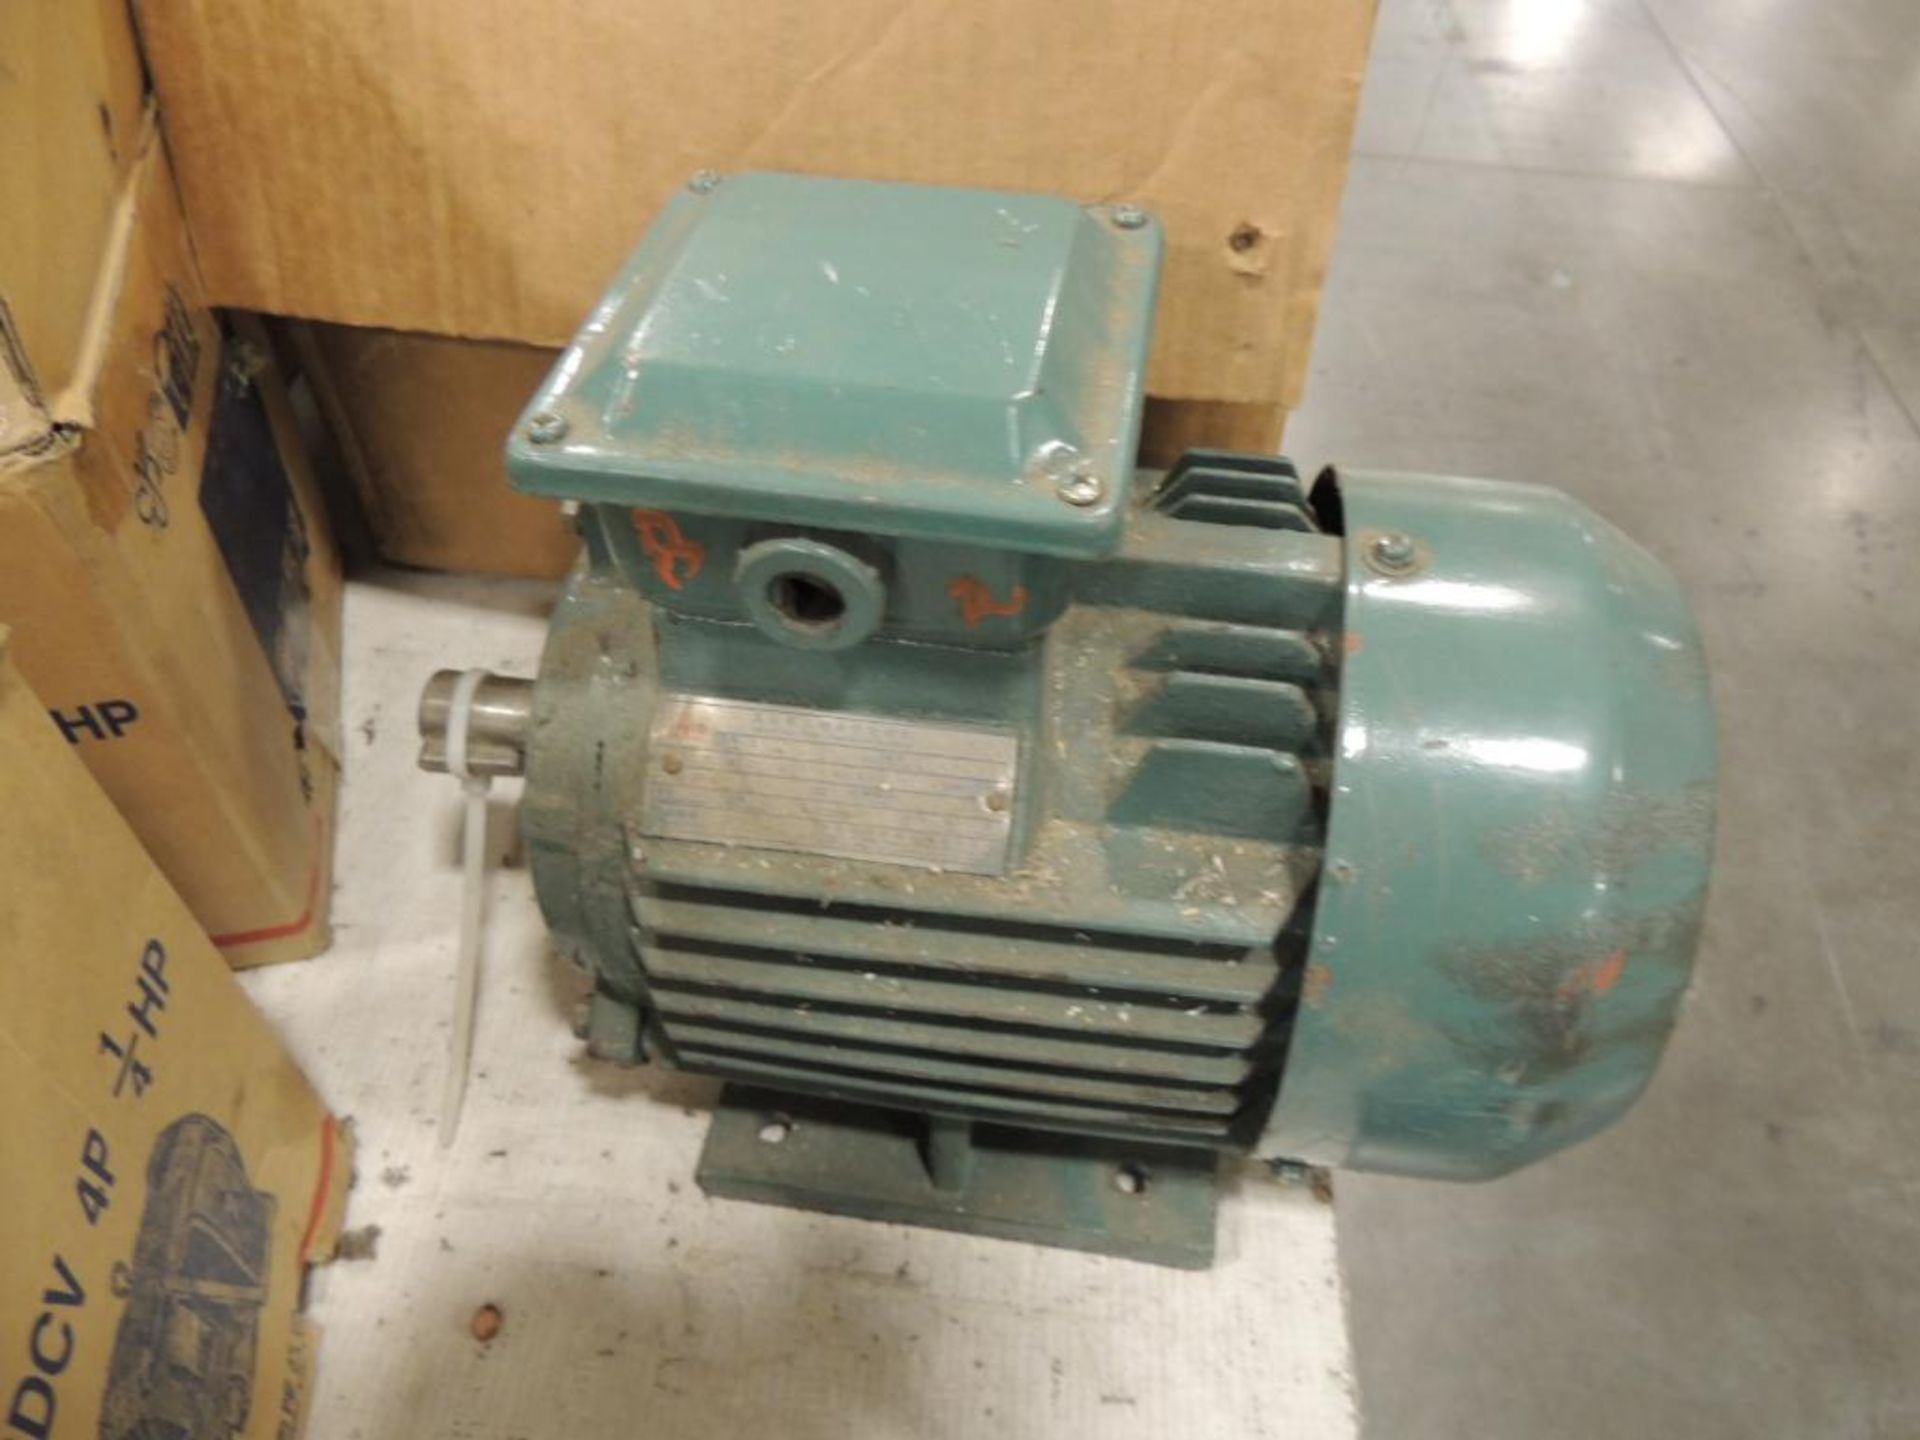 LOT: (2) High Efficiency Electric Motors, 1.5 kw, 3-Phase, 380 Volt, 2850 RPM - Image 2 of 2